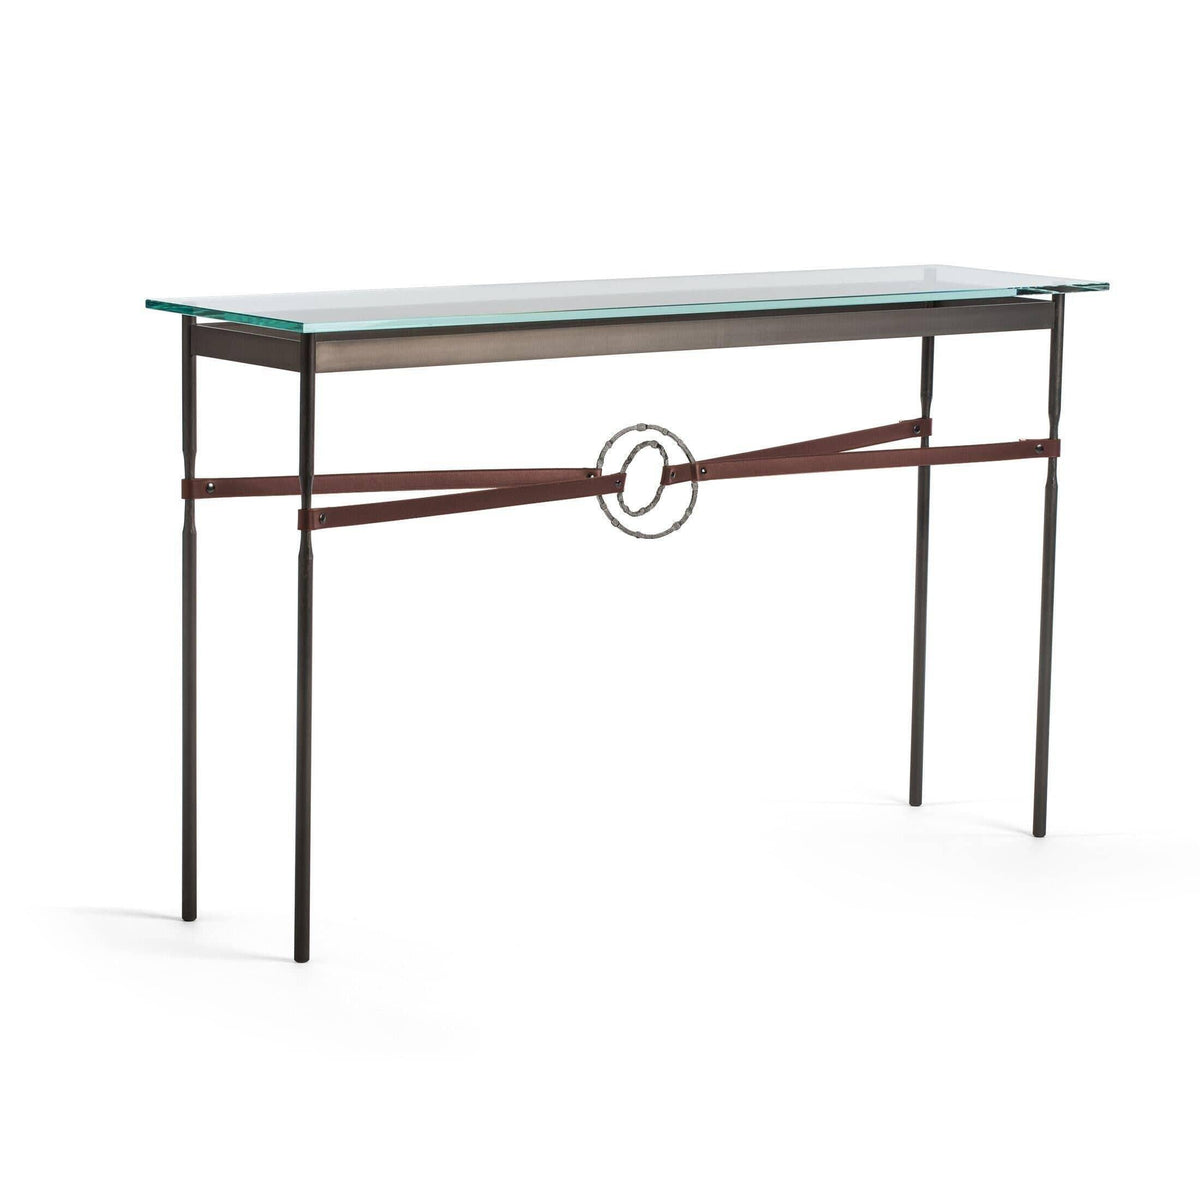 Hubbardton Forge - Equus Brown Leather Console Table - 750118-07-20-LB-VA0714 | Montreal Lighting & Hardware